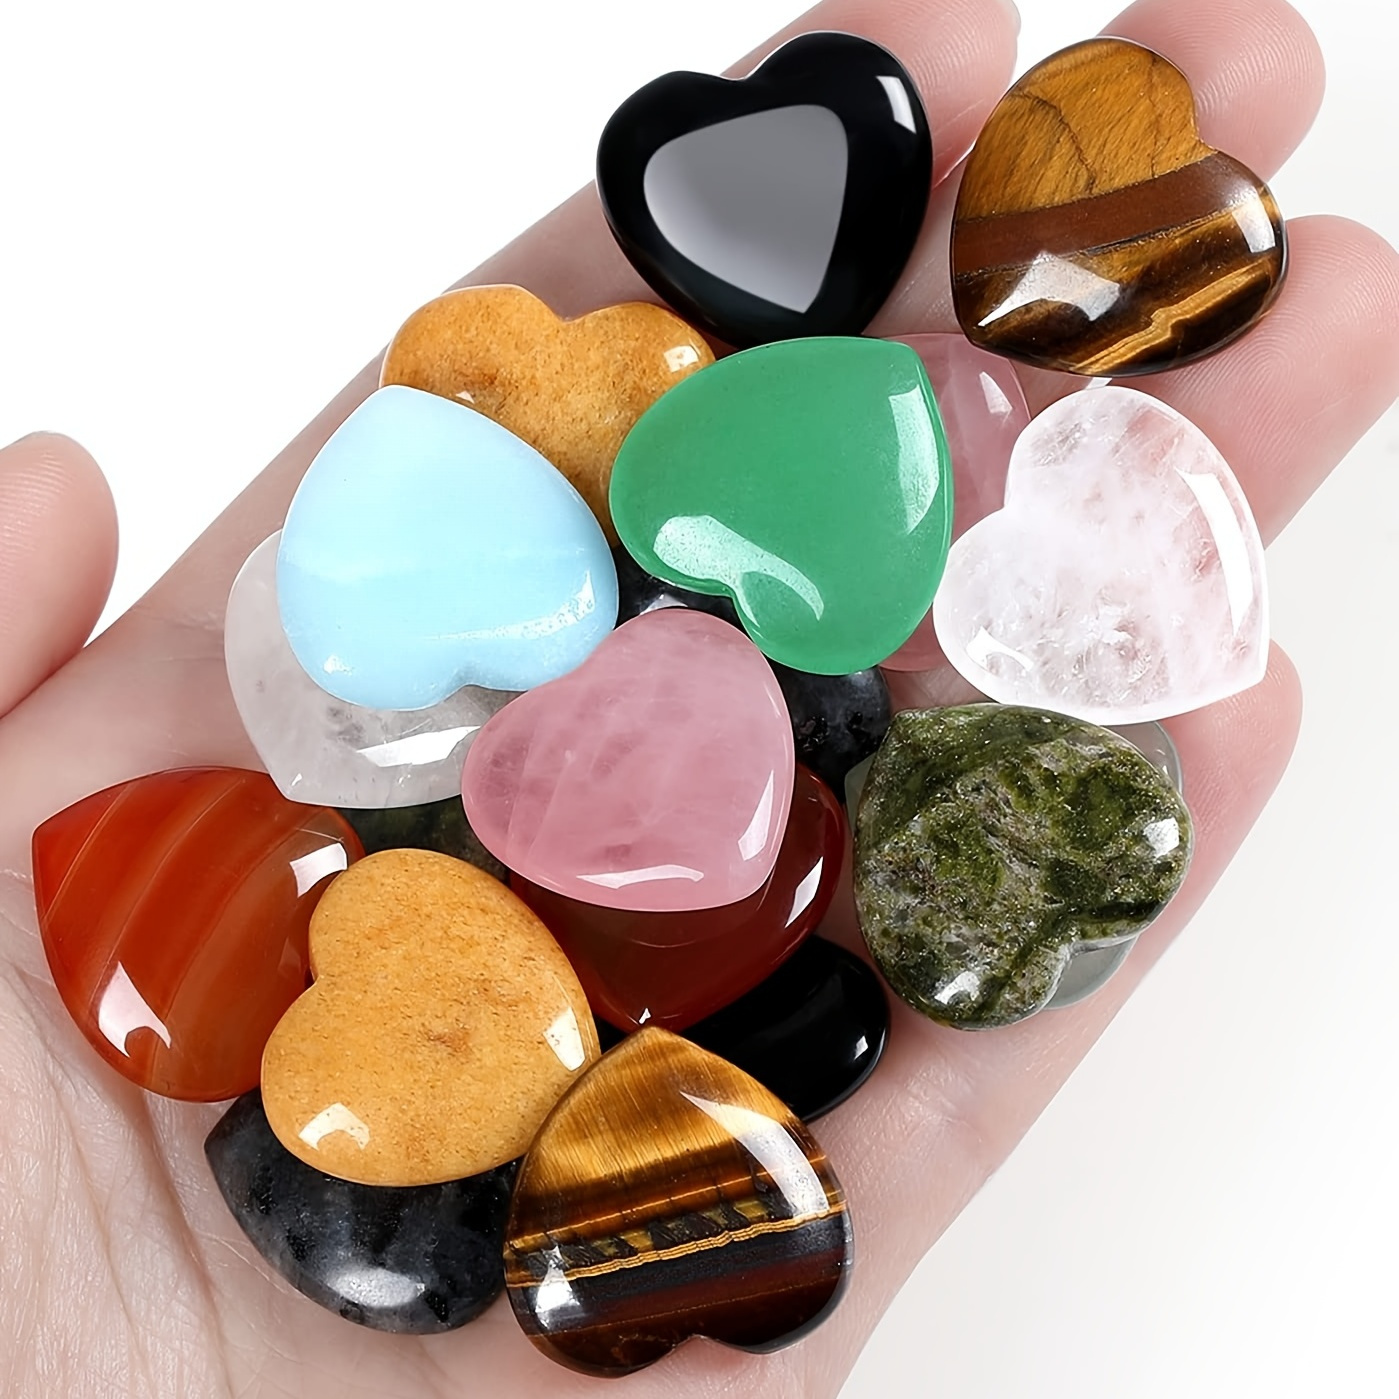 

5/10pcs Heart-shaped Healing Crystals Set - Natural Stones Polished Love Gemstones - Perfect Mother's Day Gift For Reiki Energy Balancing Meditation!